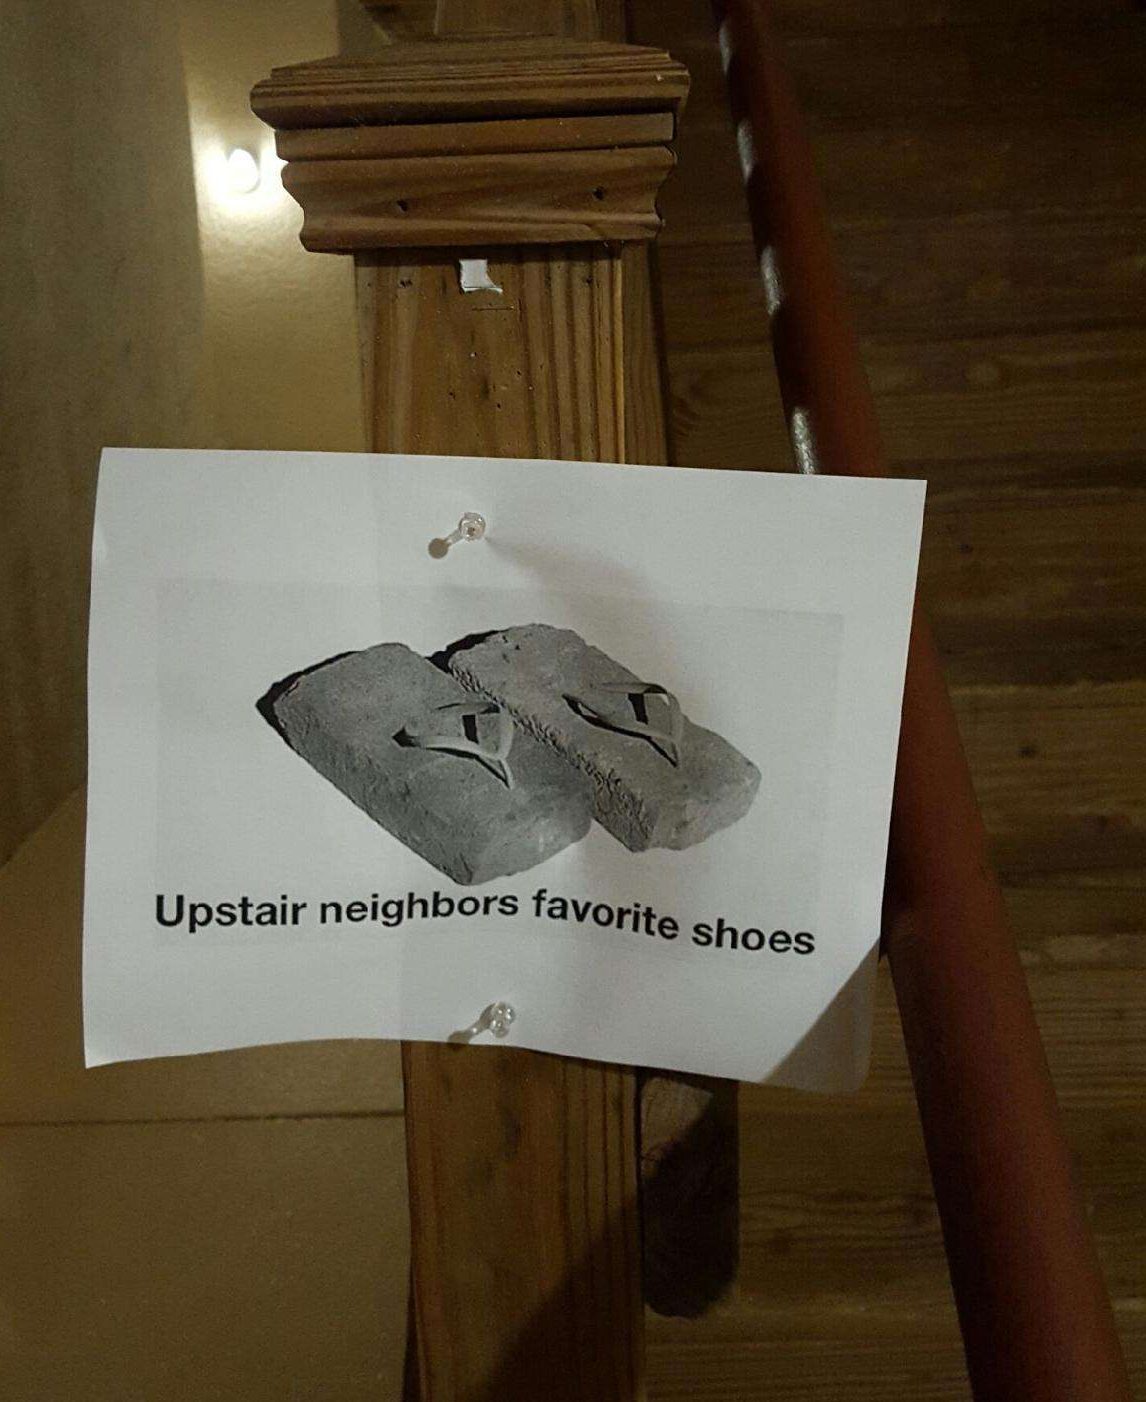 23 Times People Acted Brilliantly Petty To Their Neighbor 